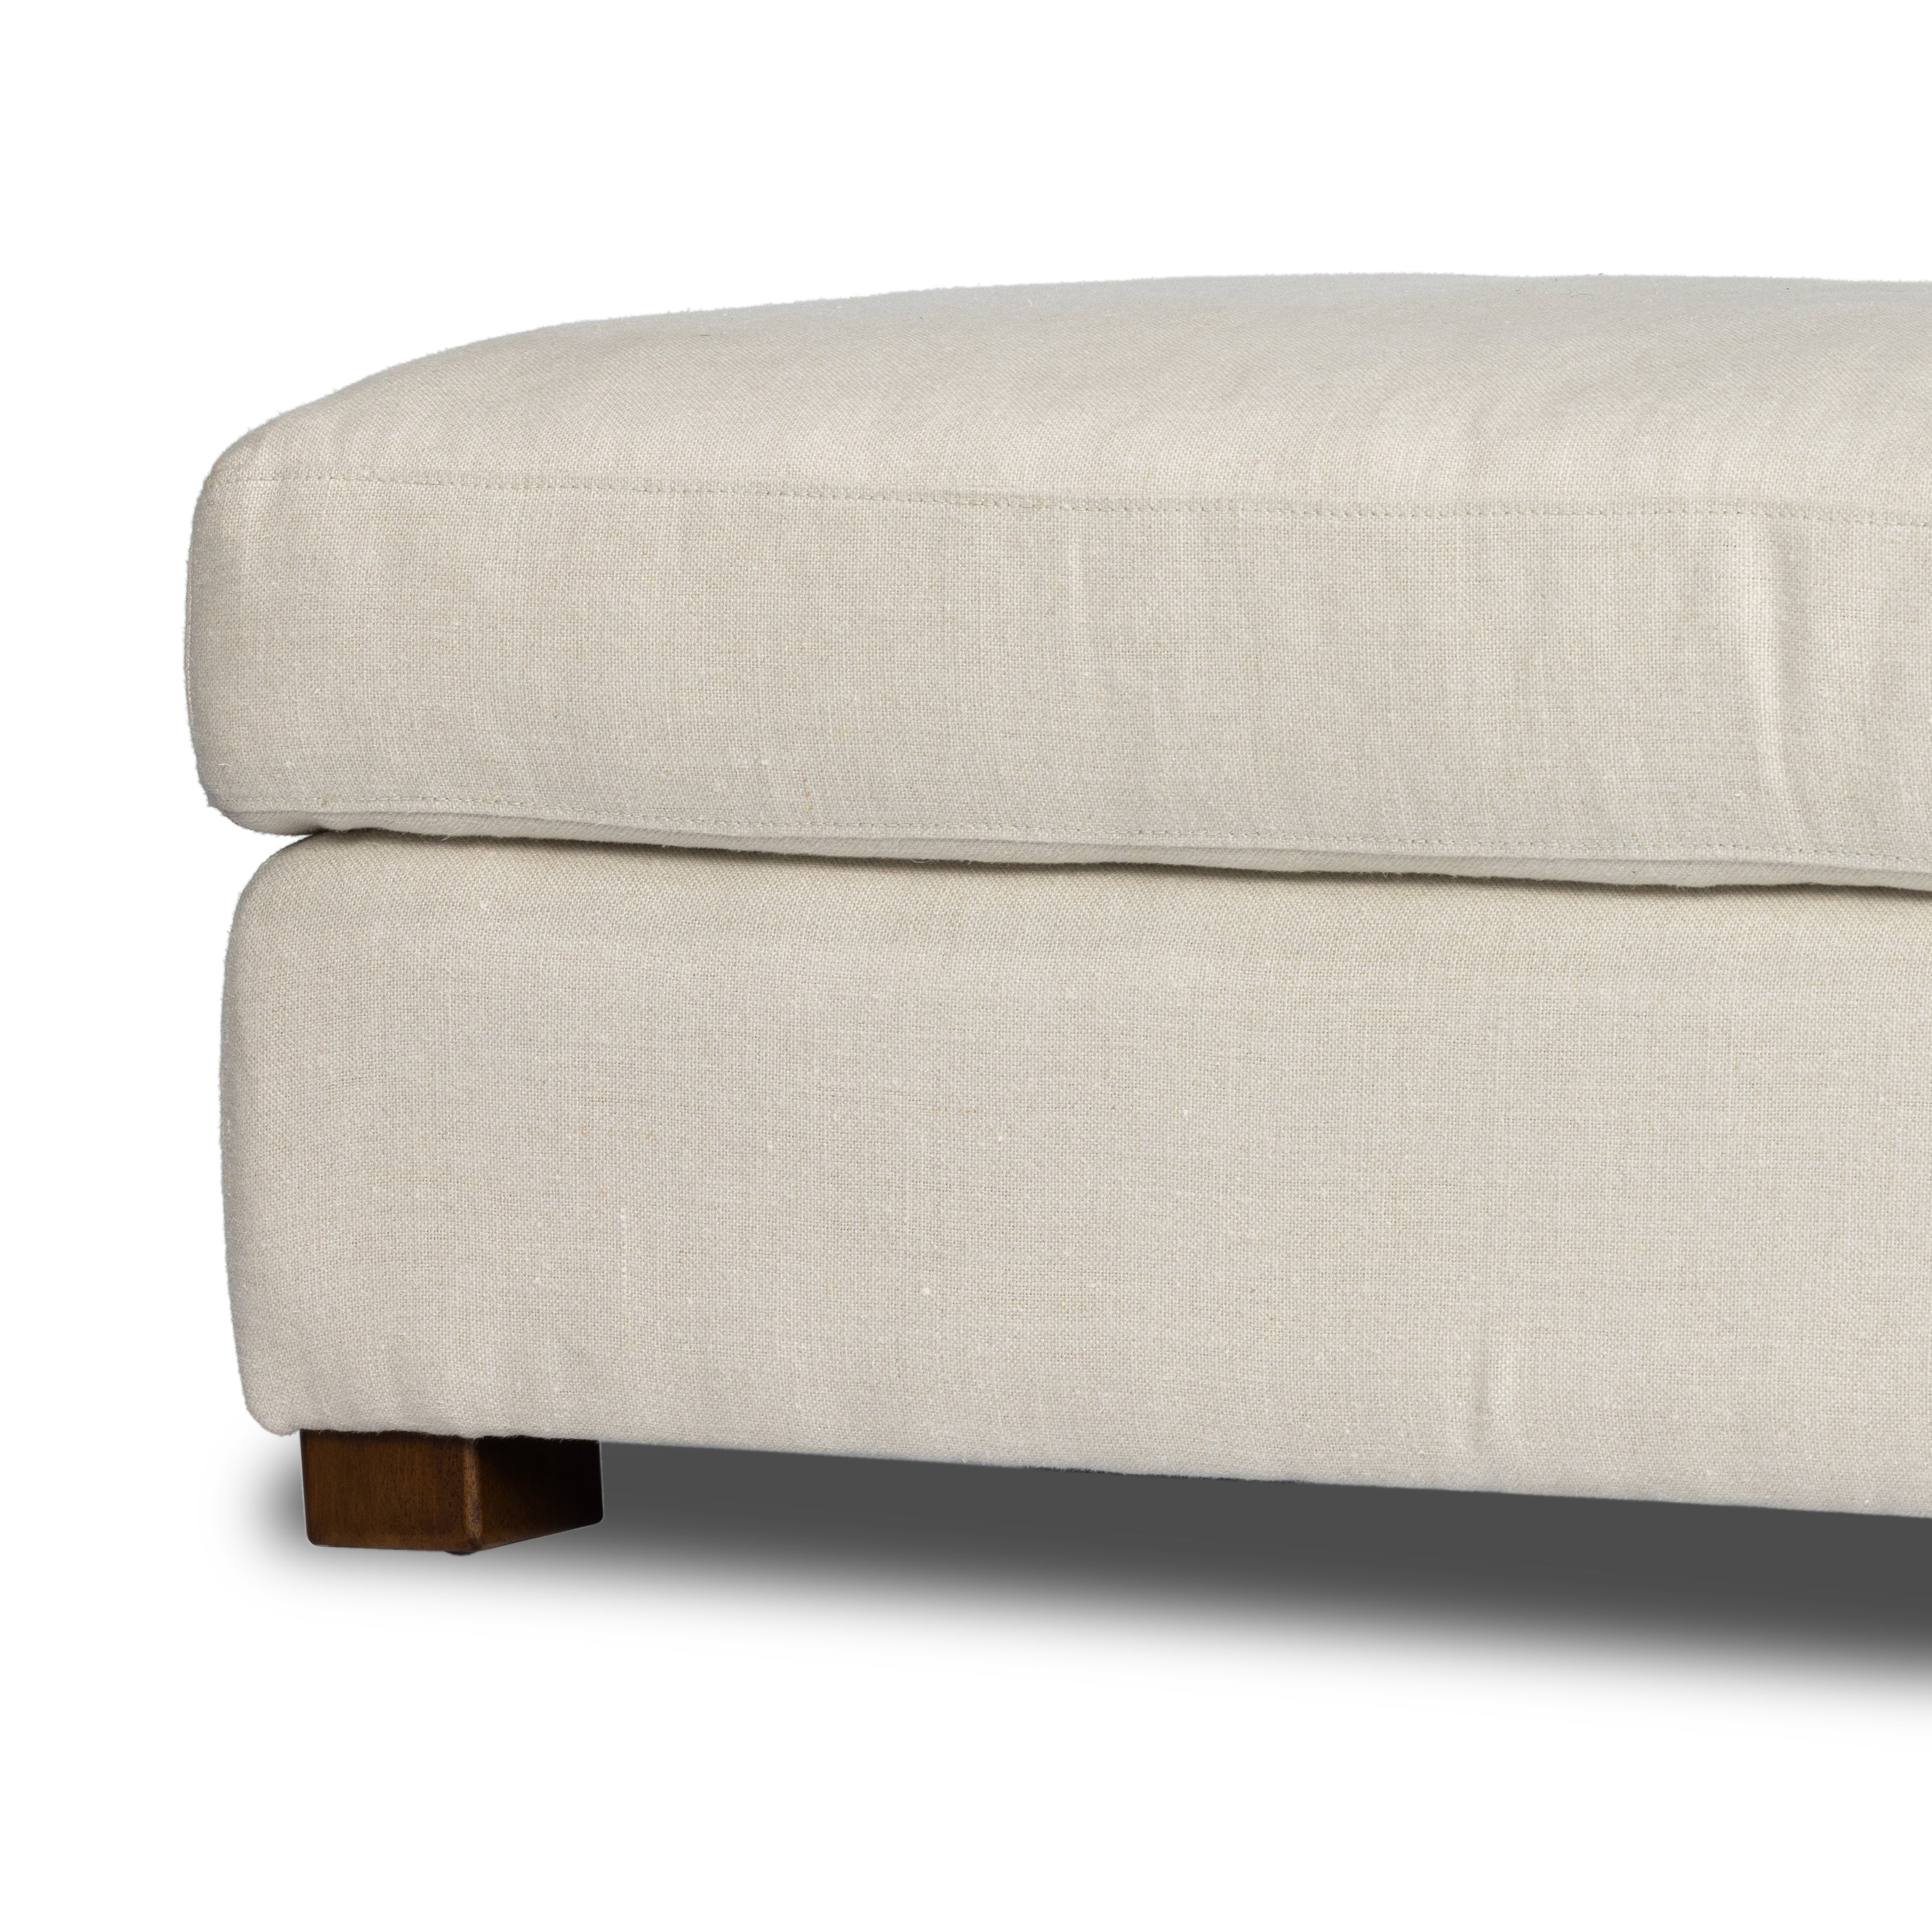 Traditional styling gets a modern spin. Feather-blend cushioning accents simple parawood feet. This lounge-worthy ottoman features sustainably made Belgian Linenâ„¢. Naturally durable and soft to the touch, Libecoâ„¢-sourced linens are artisan-made without toxic chemicals. Amethyst Home provides interior design, new construction, custom furniture and area rugs in the Portland metro area